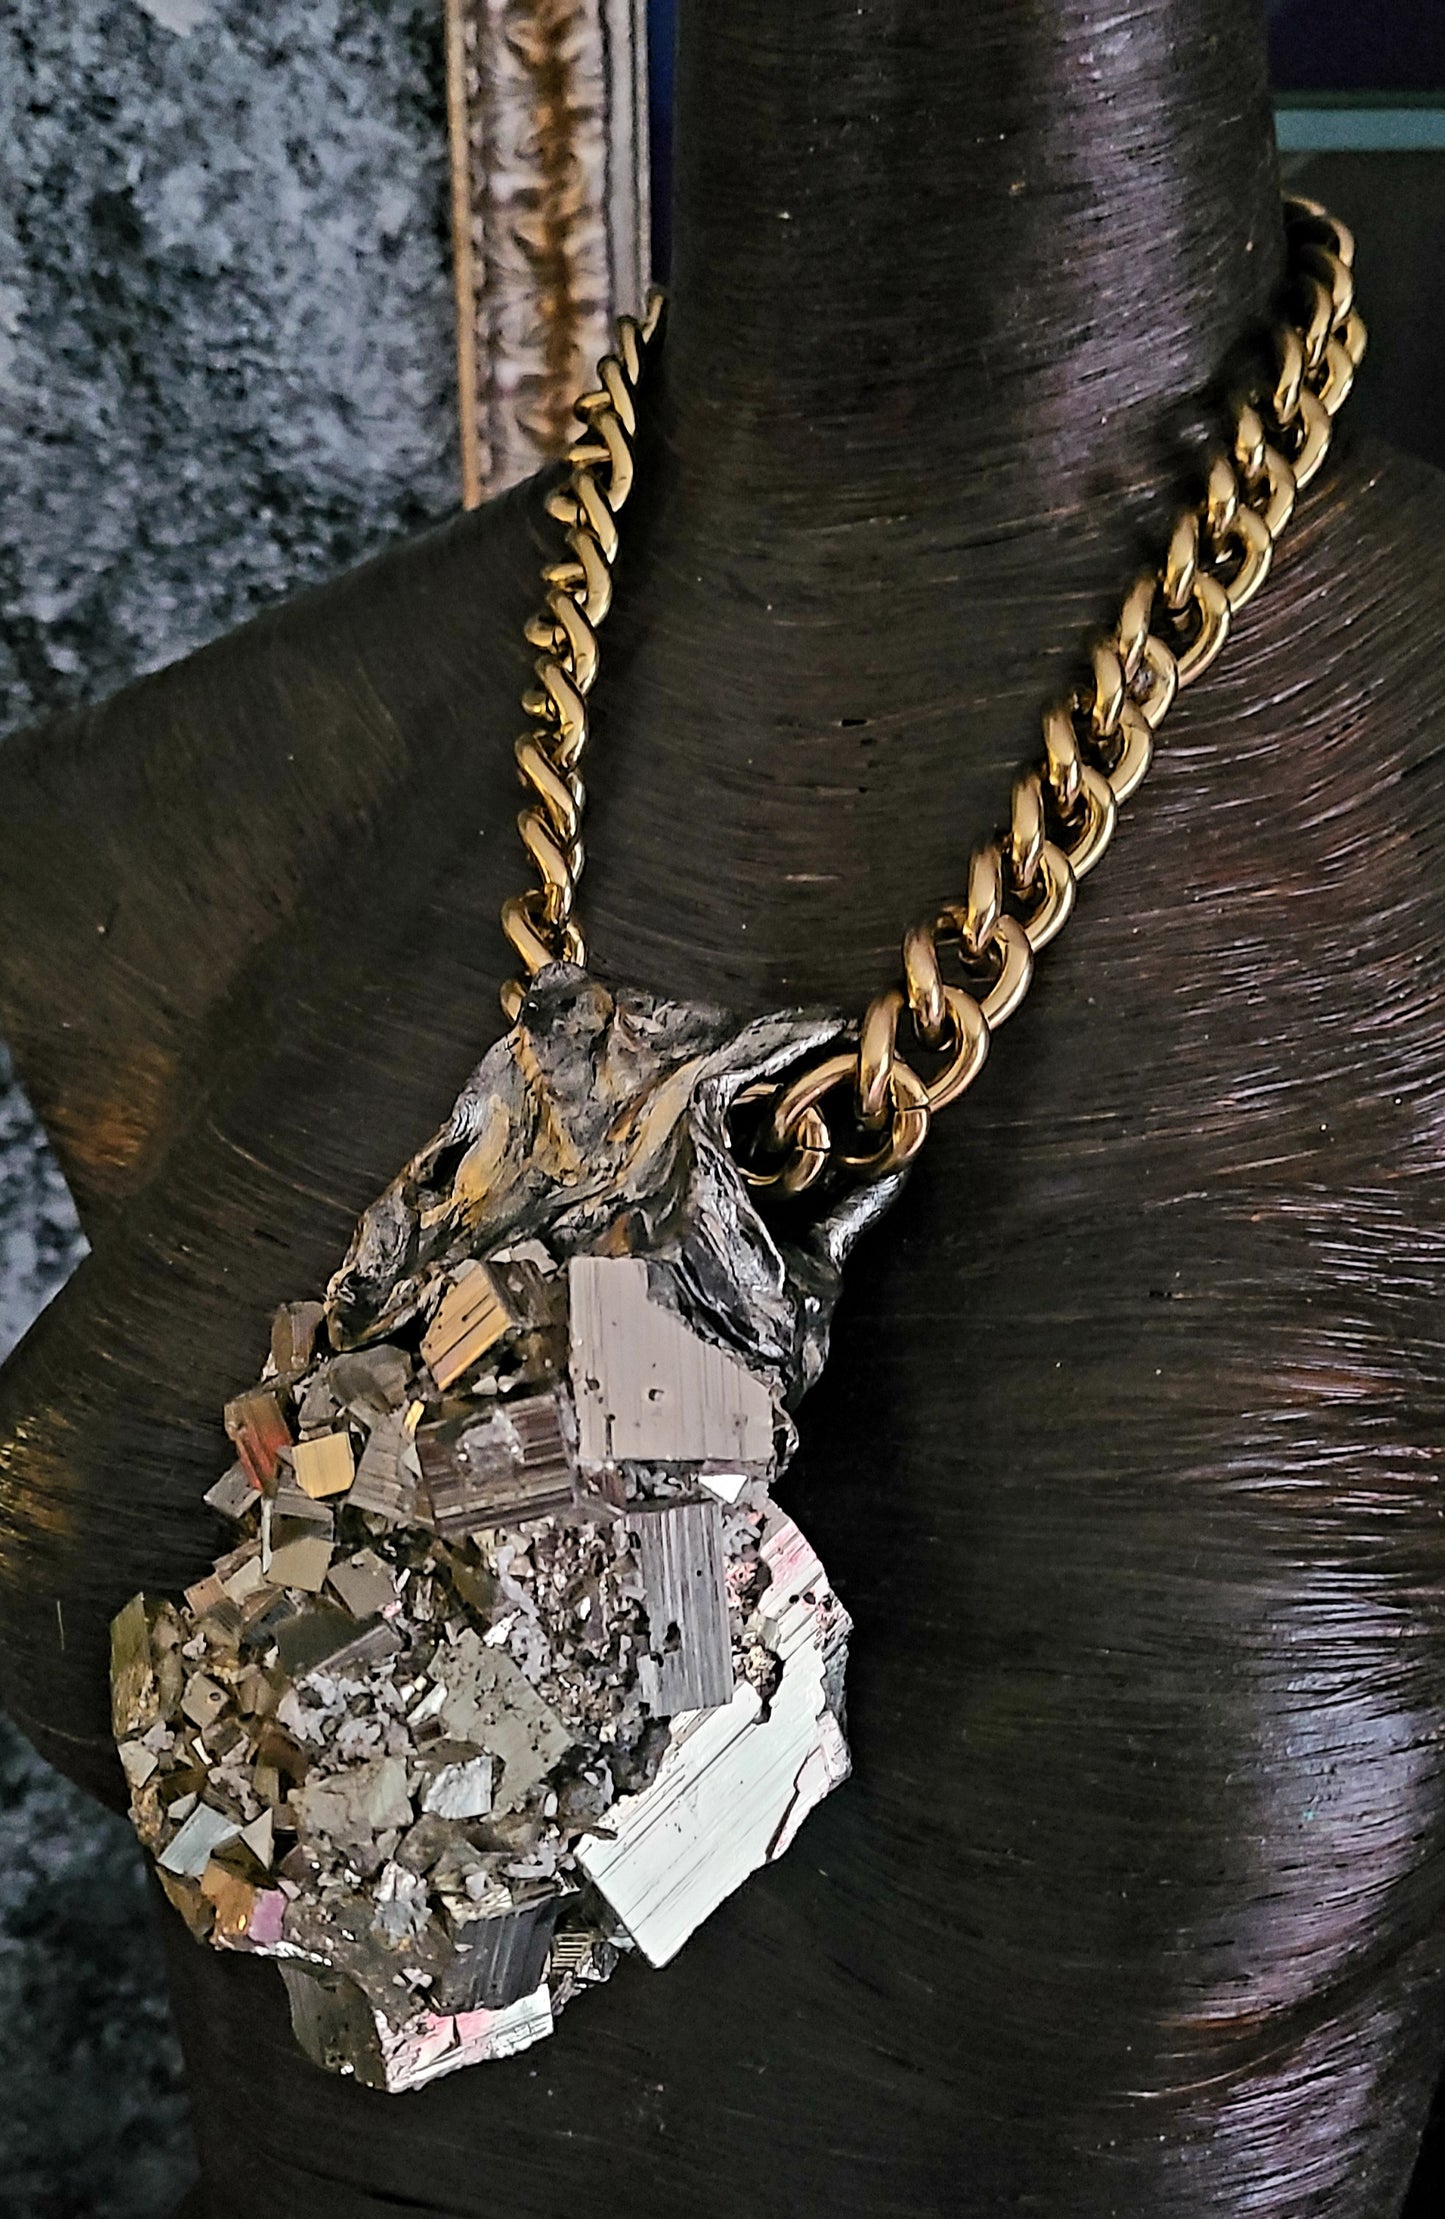 Huge Pyrite Sculpted Statement Pendant, Silver Gold Crystal Amulet, Flashy Gemstone Hip Hop Chest Piece, Mens Rocker Chic Accessory, R & B Jewelry